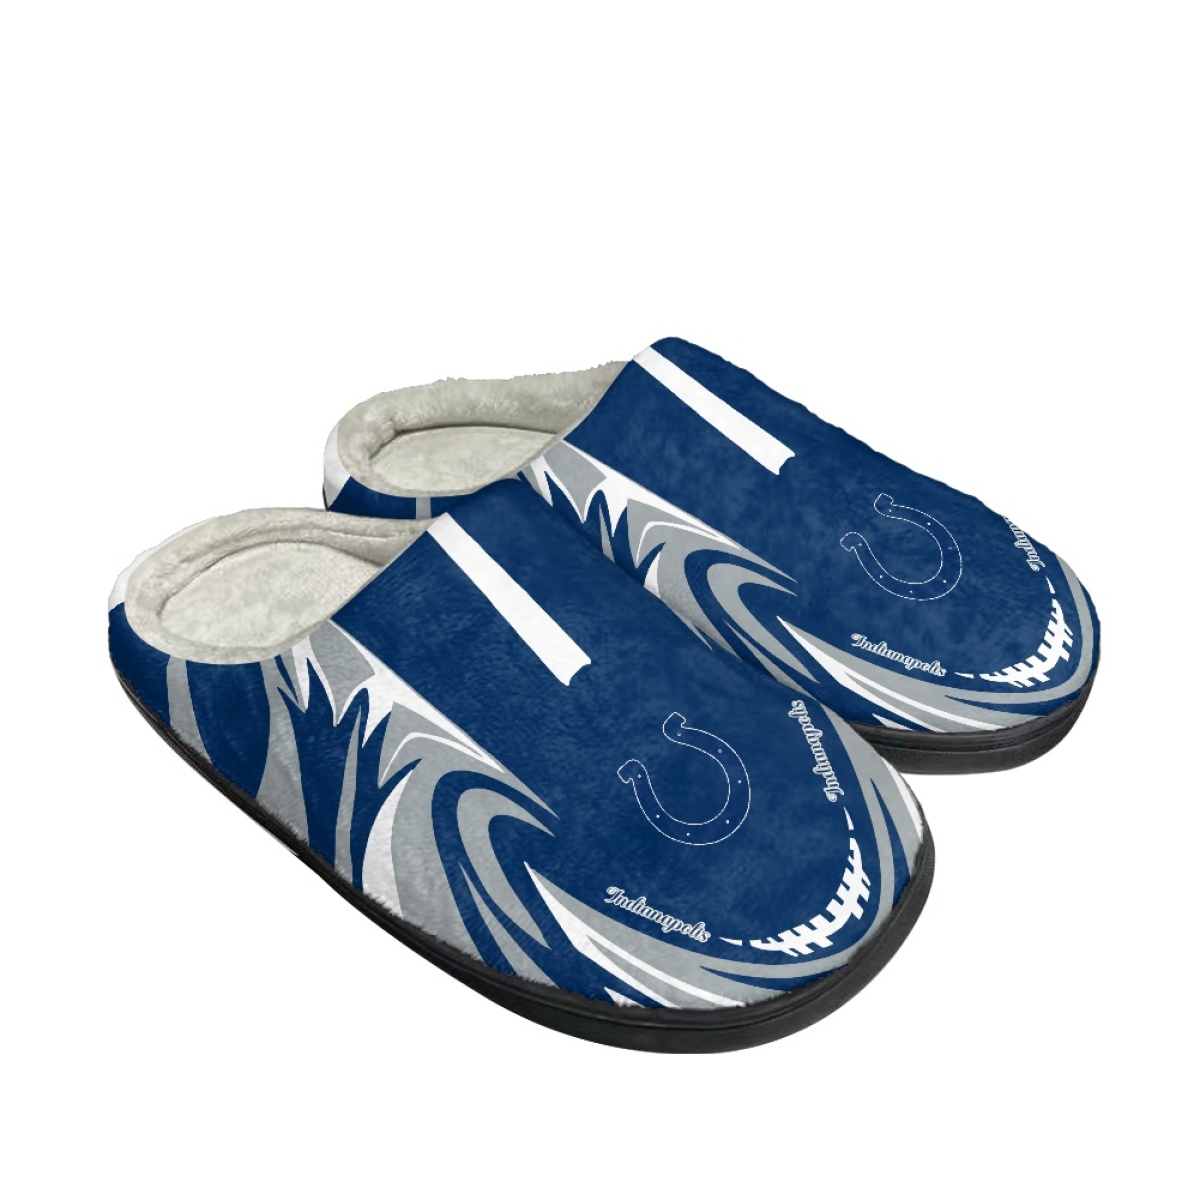 Women's Indianapolis Colts Slippers/Shoes 004